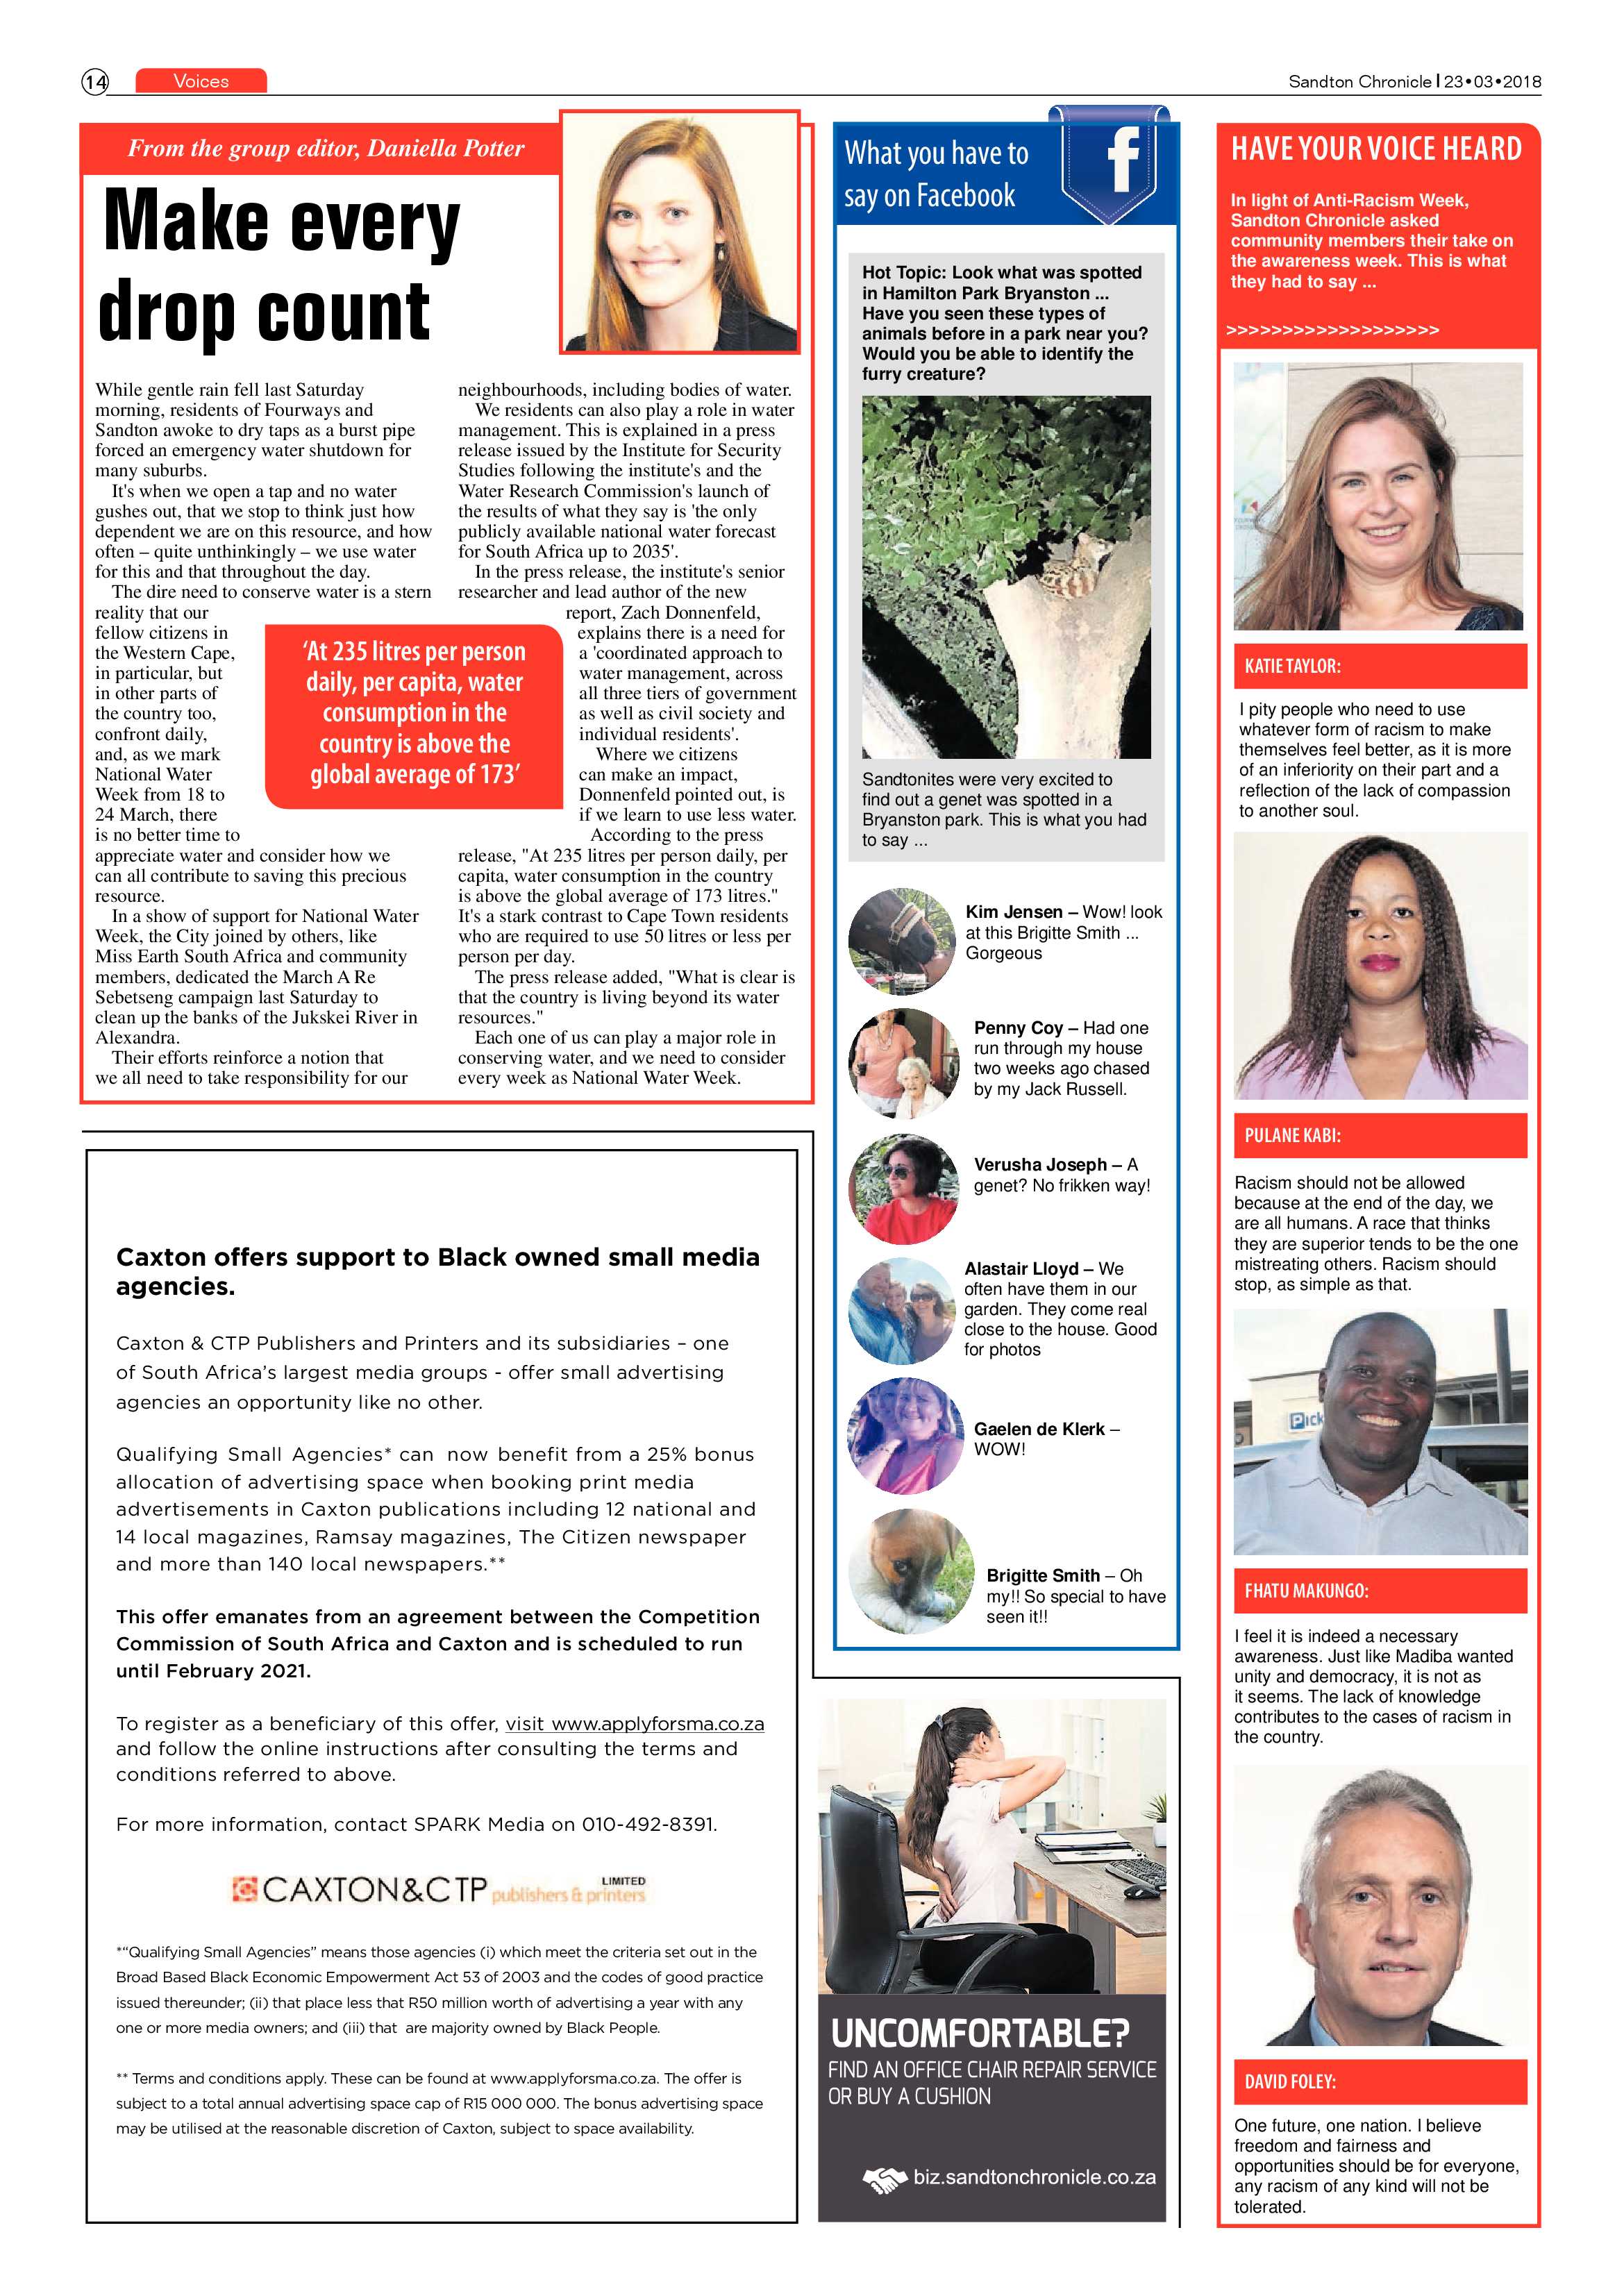 Sandton Chronicle 23 March 2018 page 14